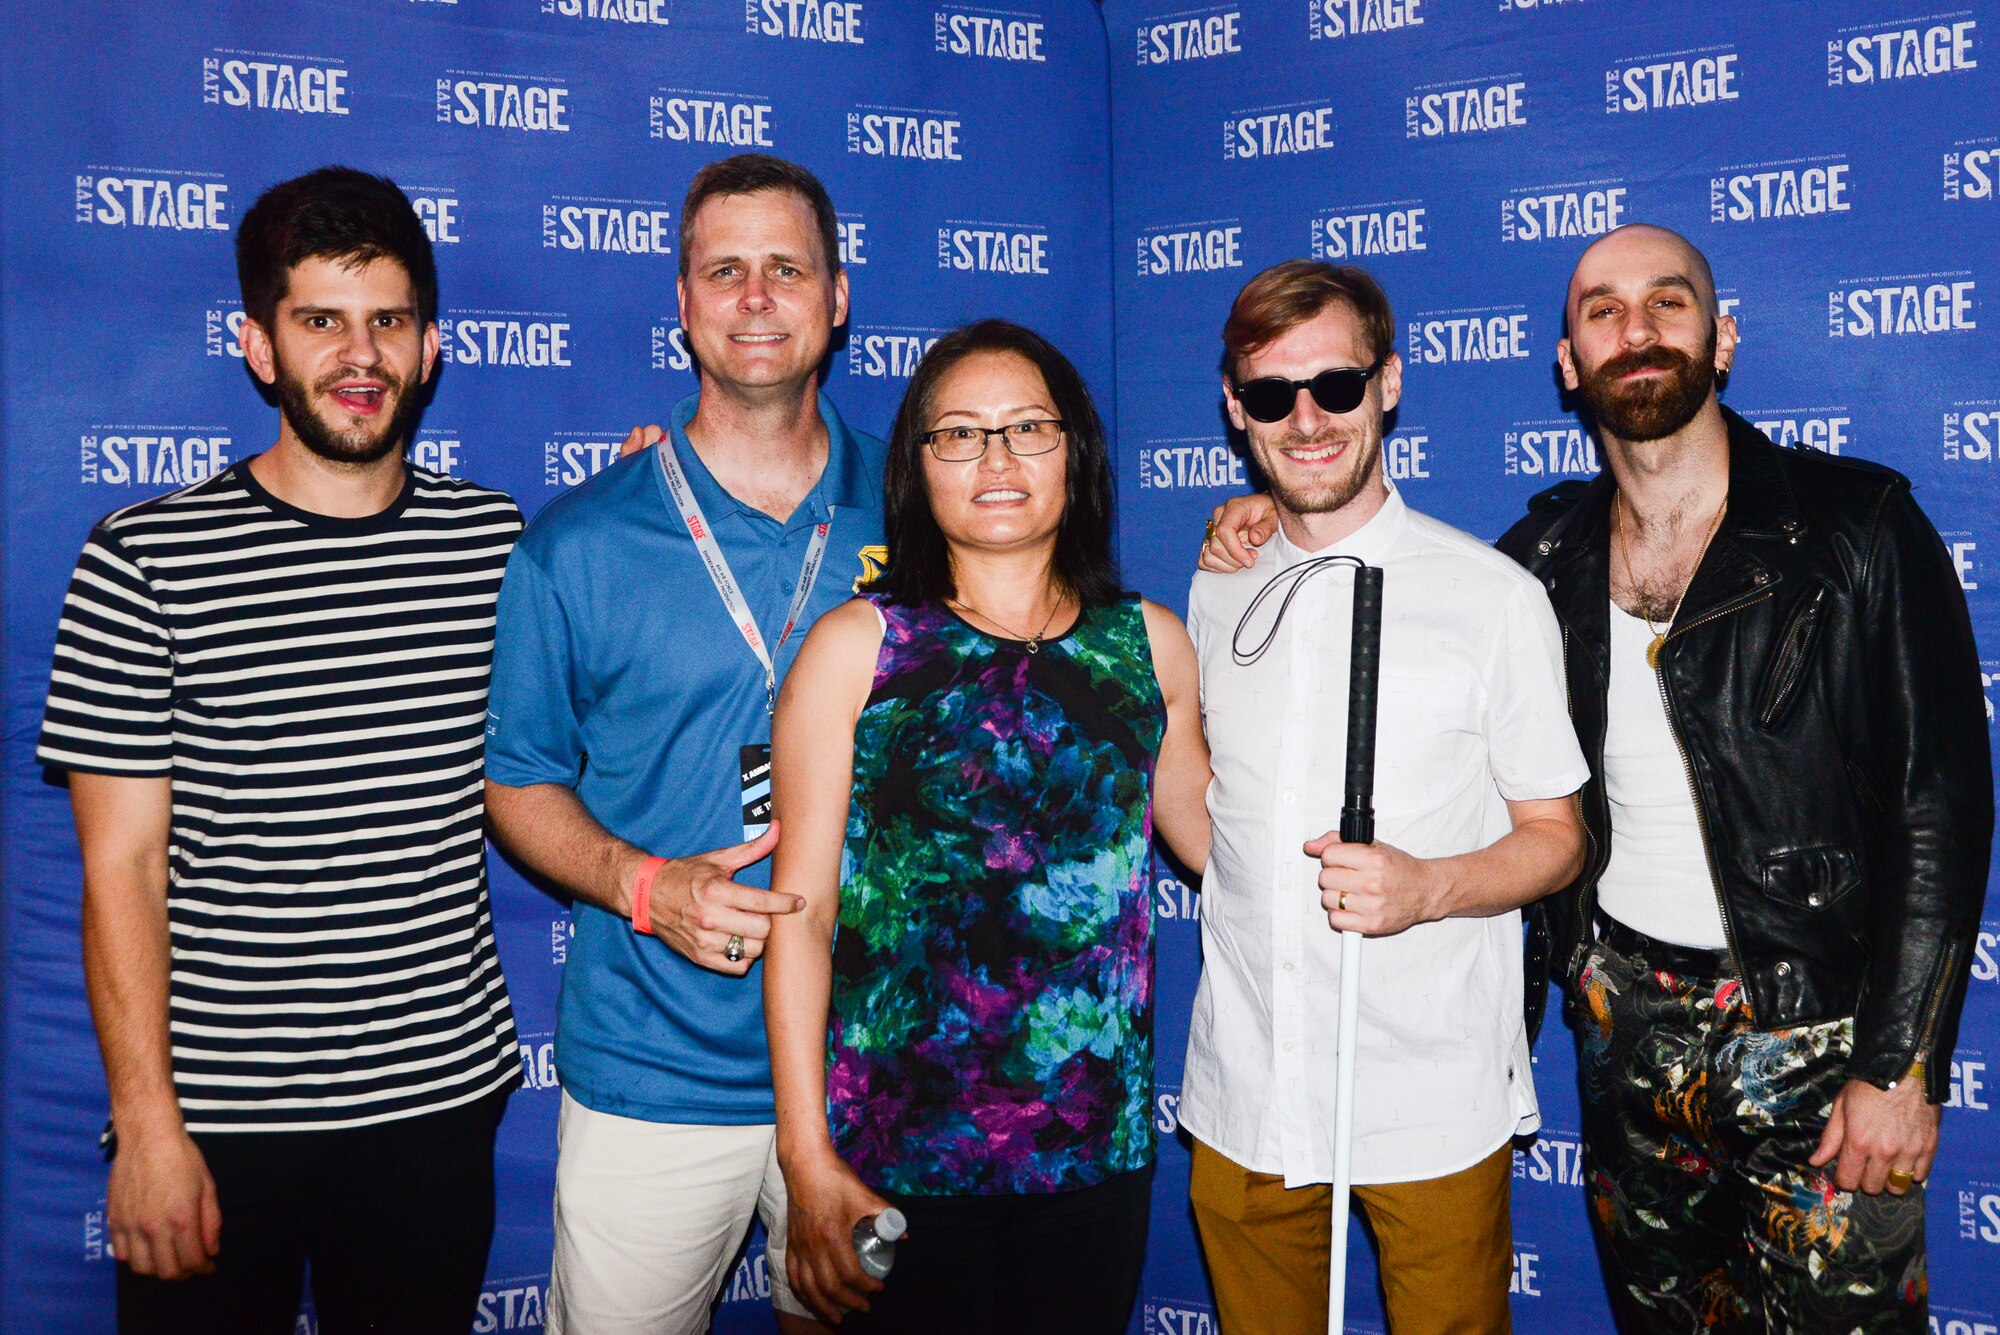 Col. Joel Safranek (second from left), 436th Airlift Wing commander, and his wife, Hana, pose with members of X Ambassadors during the band meet and greet prior to the End of Summer Music Festival Sept. 2, 2018, at Dover Air Force Base, Del. The rock band hails from Ithaca, N.Y. (U.S. Air Force photo by Airman 1st Class Dedan Dials)